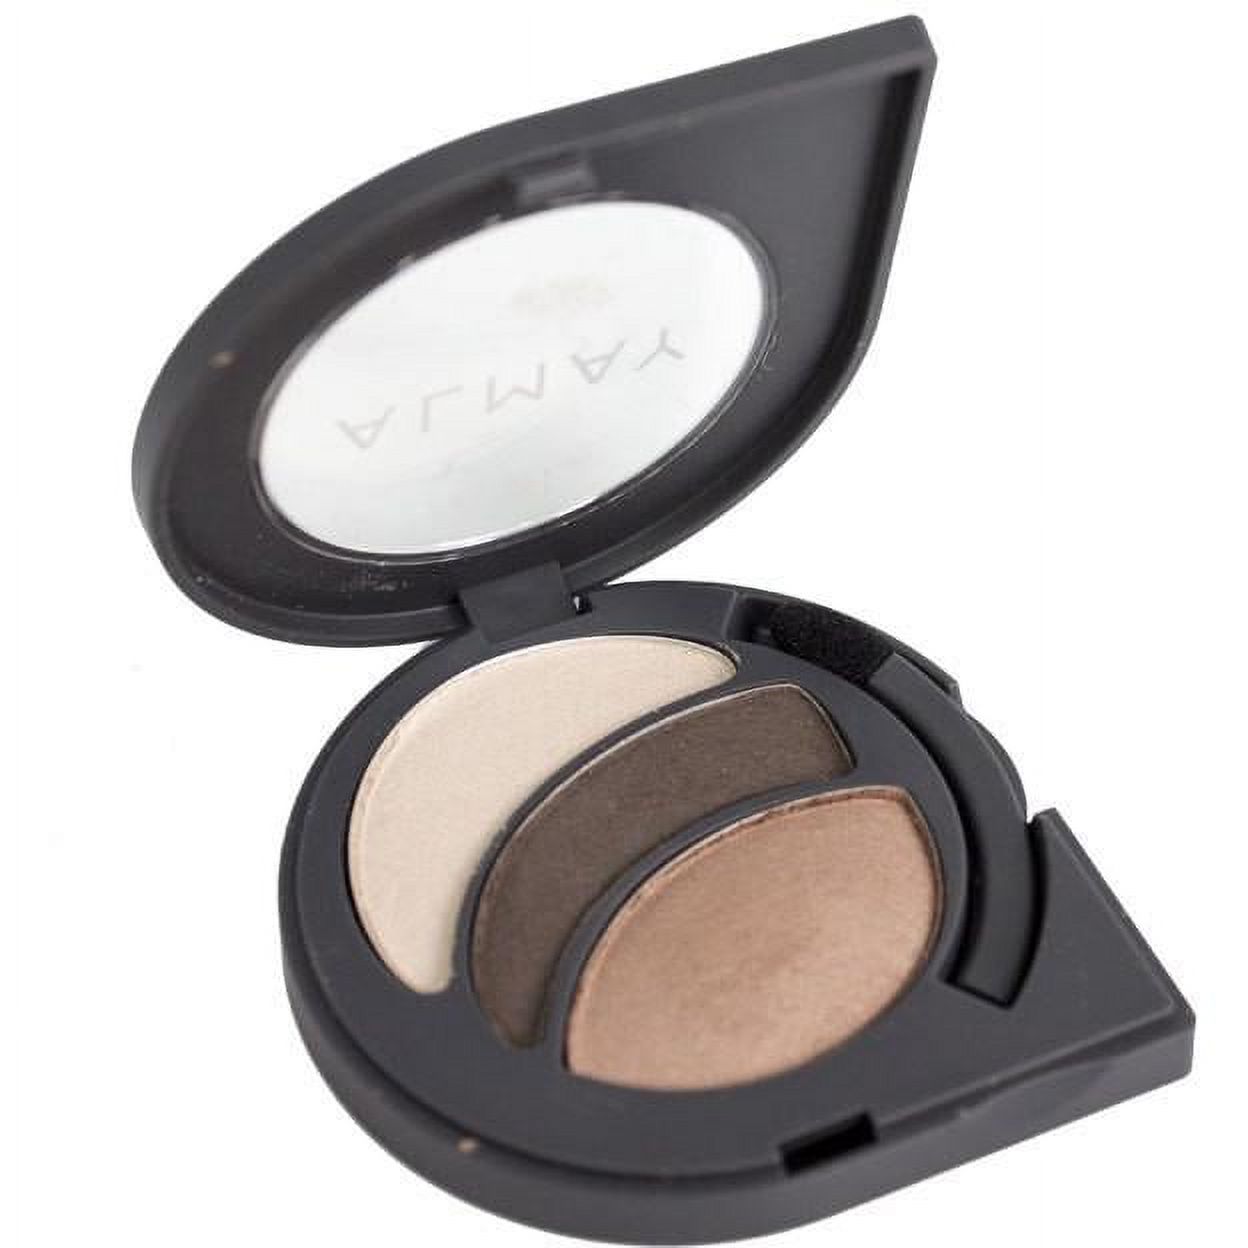 Almay Intense I-Color Everyday Neutrals All Day Wear Powder Eye Shadow, For Brown Eyes - image 3 of 6